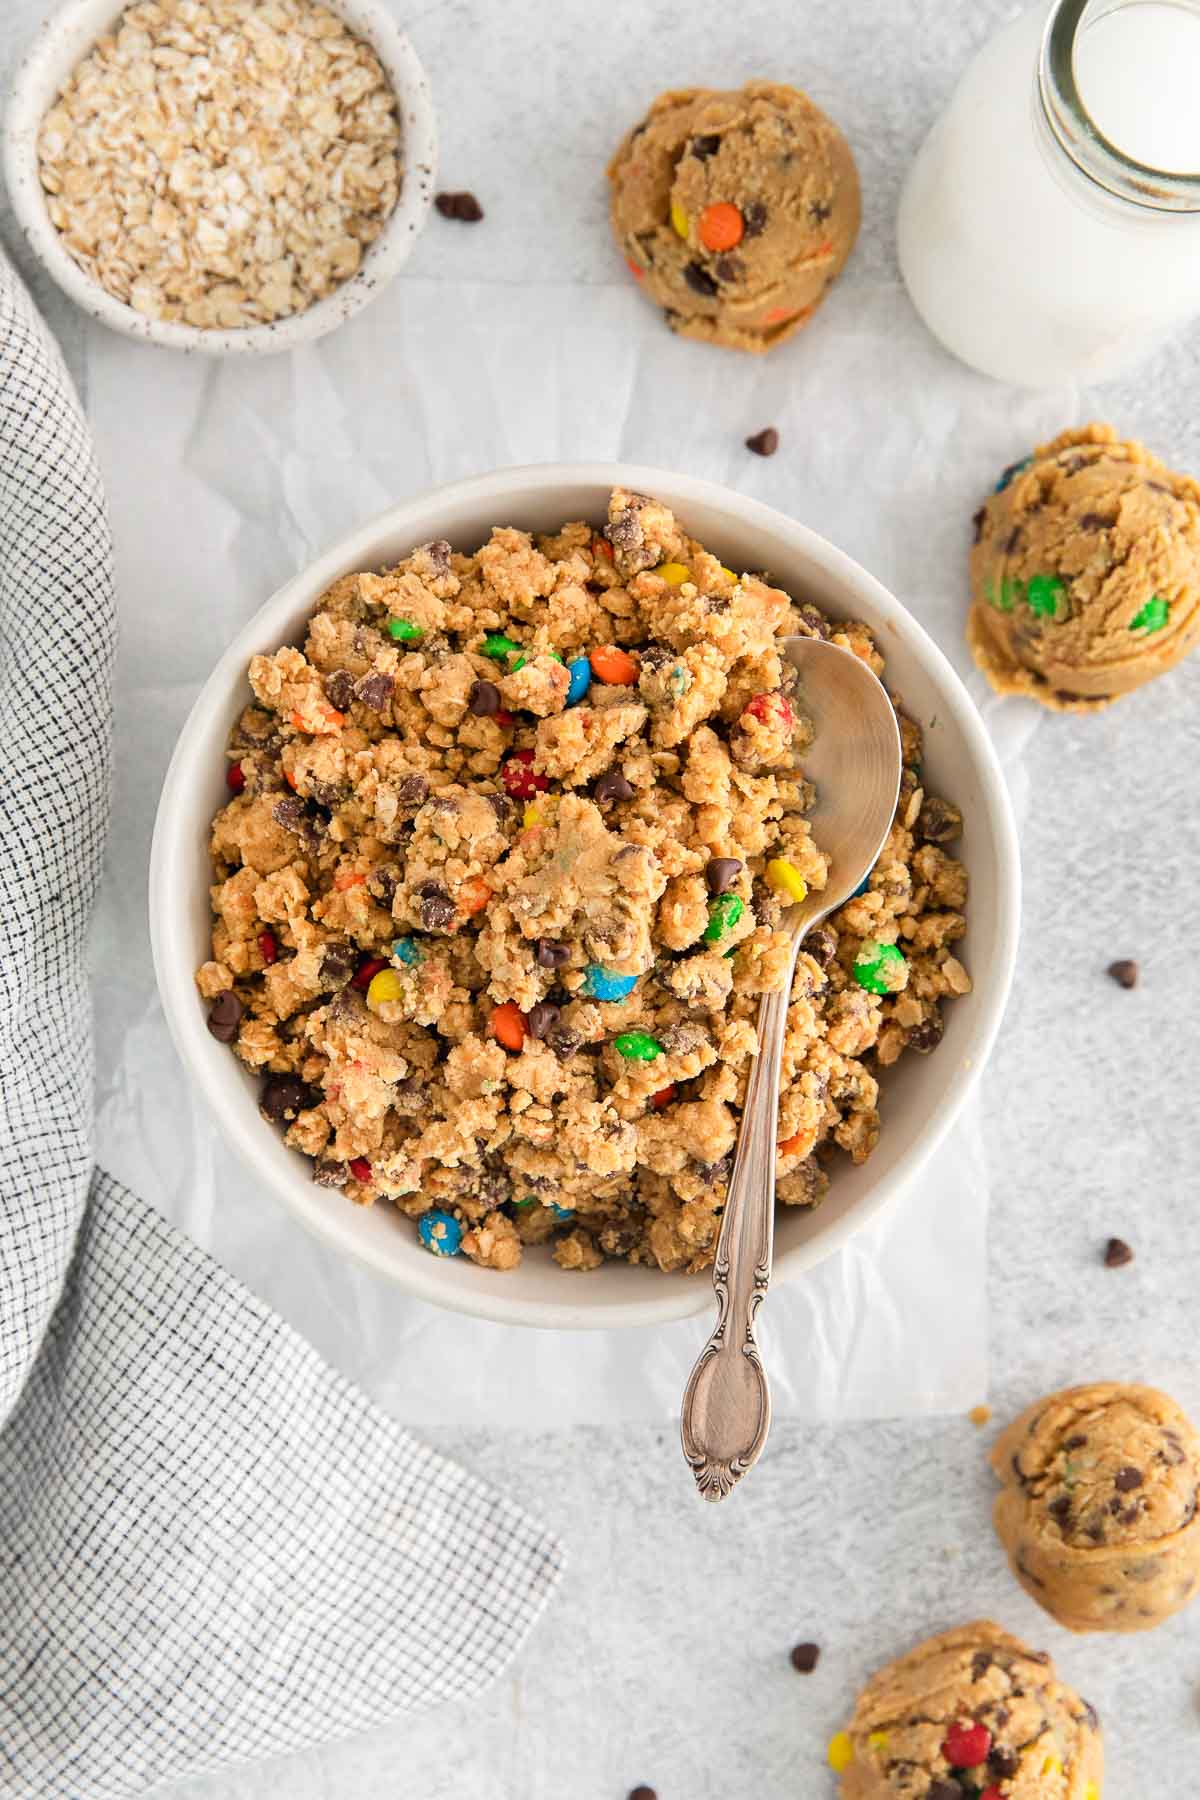 white bowl full of edible peanut butter cookie dough with chocolate chips and M&M's.